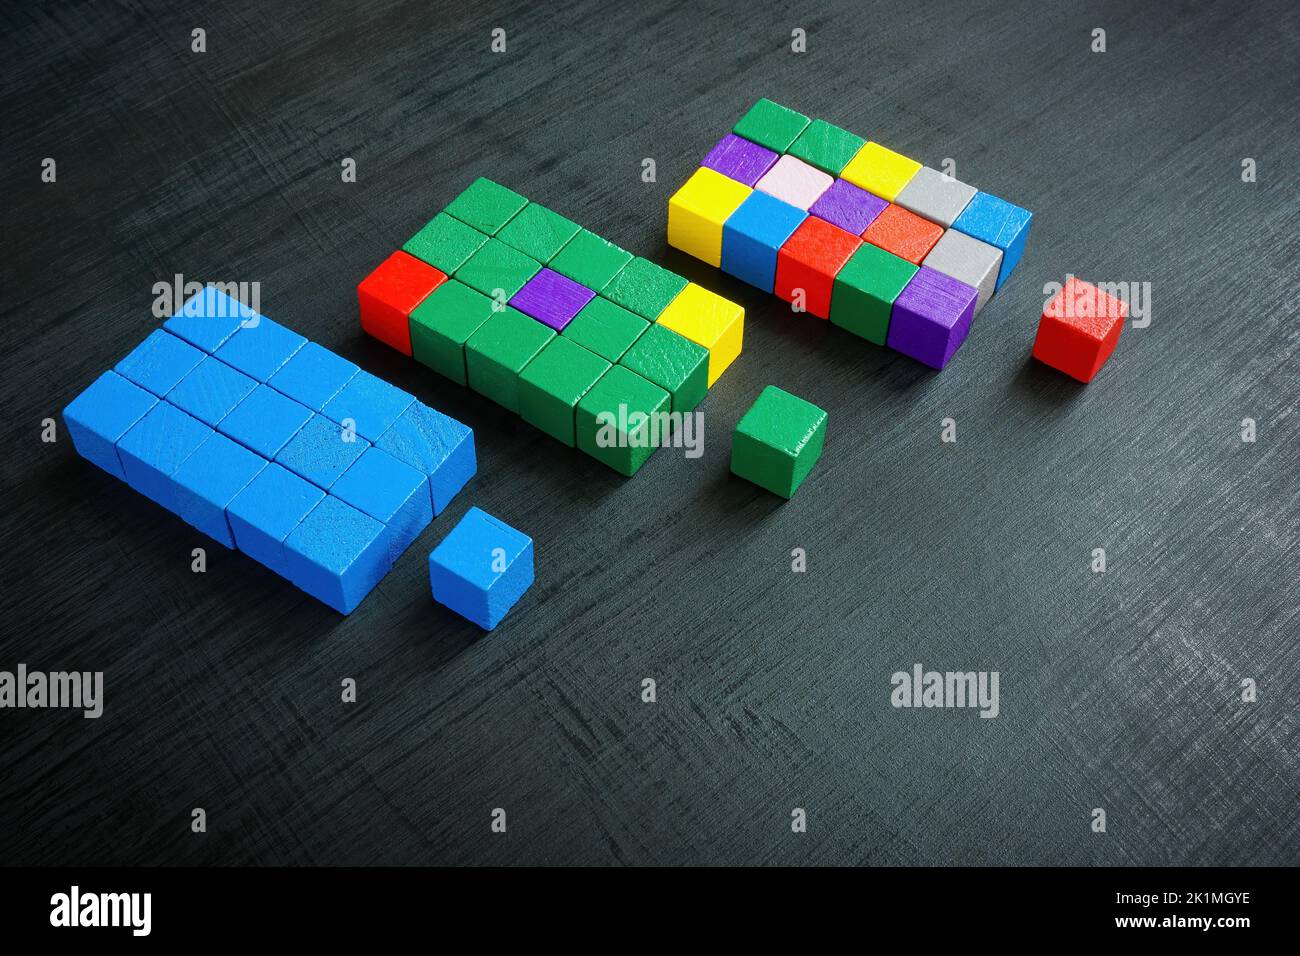 Diversity in leadership concept. Colored cubes as team symbols. Stock Photo